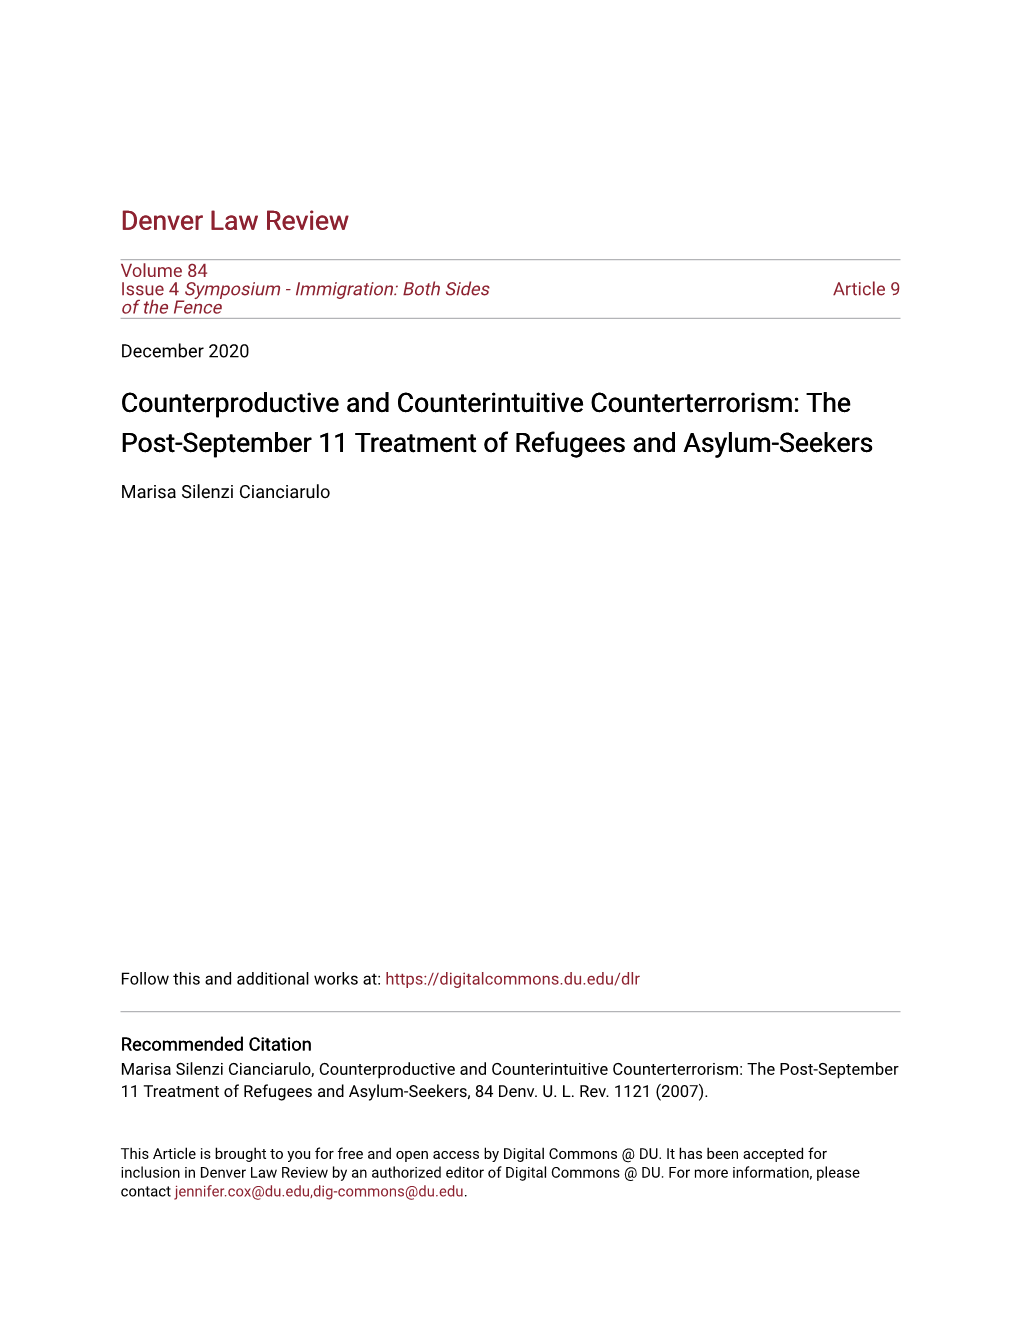 Counterproductive and Counterintuitive Counterterrorism: the Post-September 11 Treatment of Refugees and Asylum-Seekers